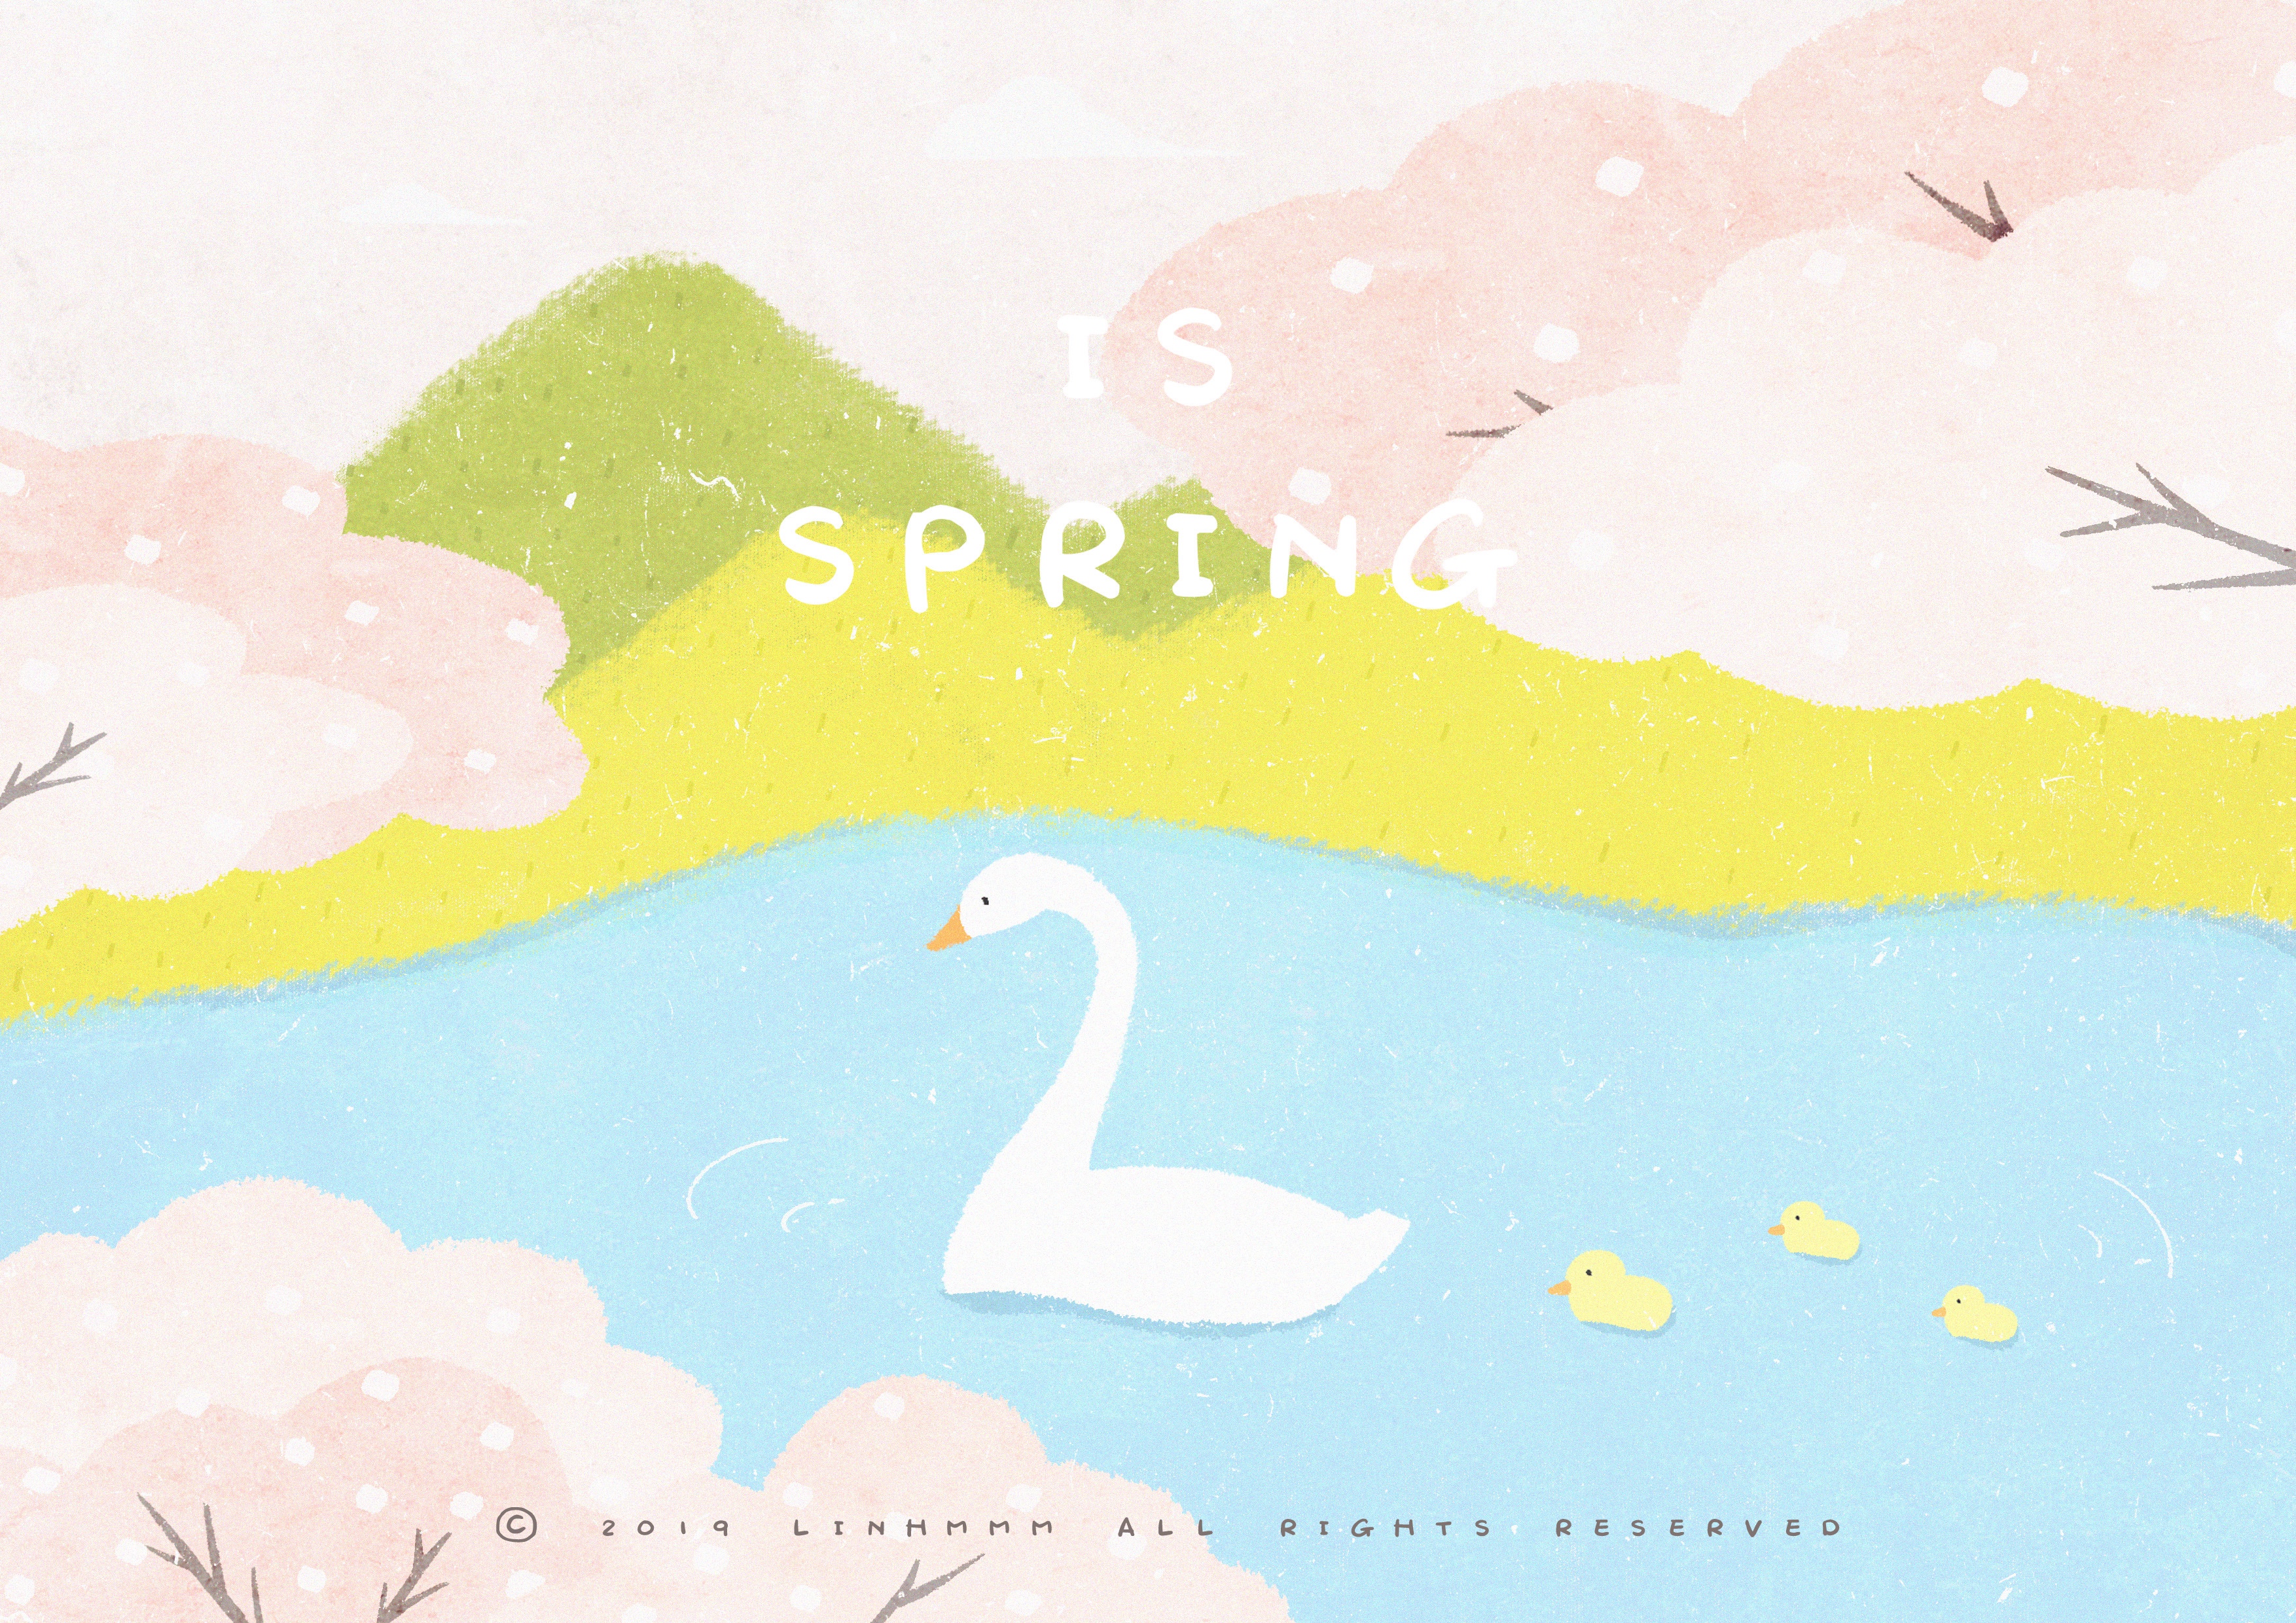 IS SPRING